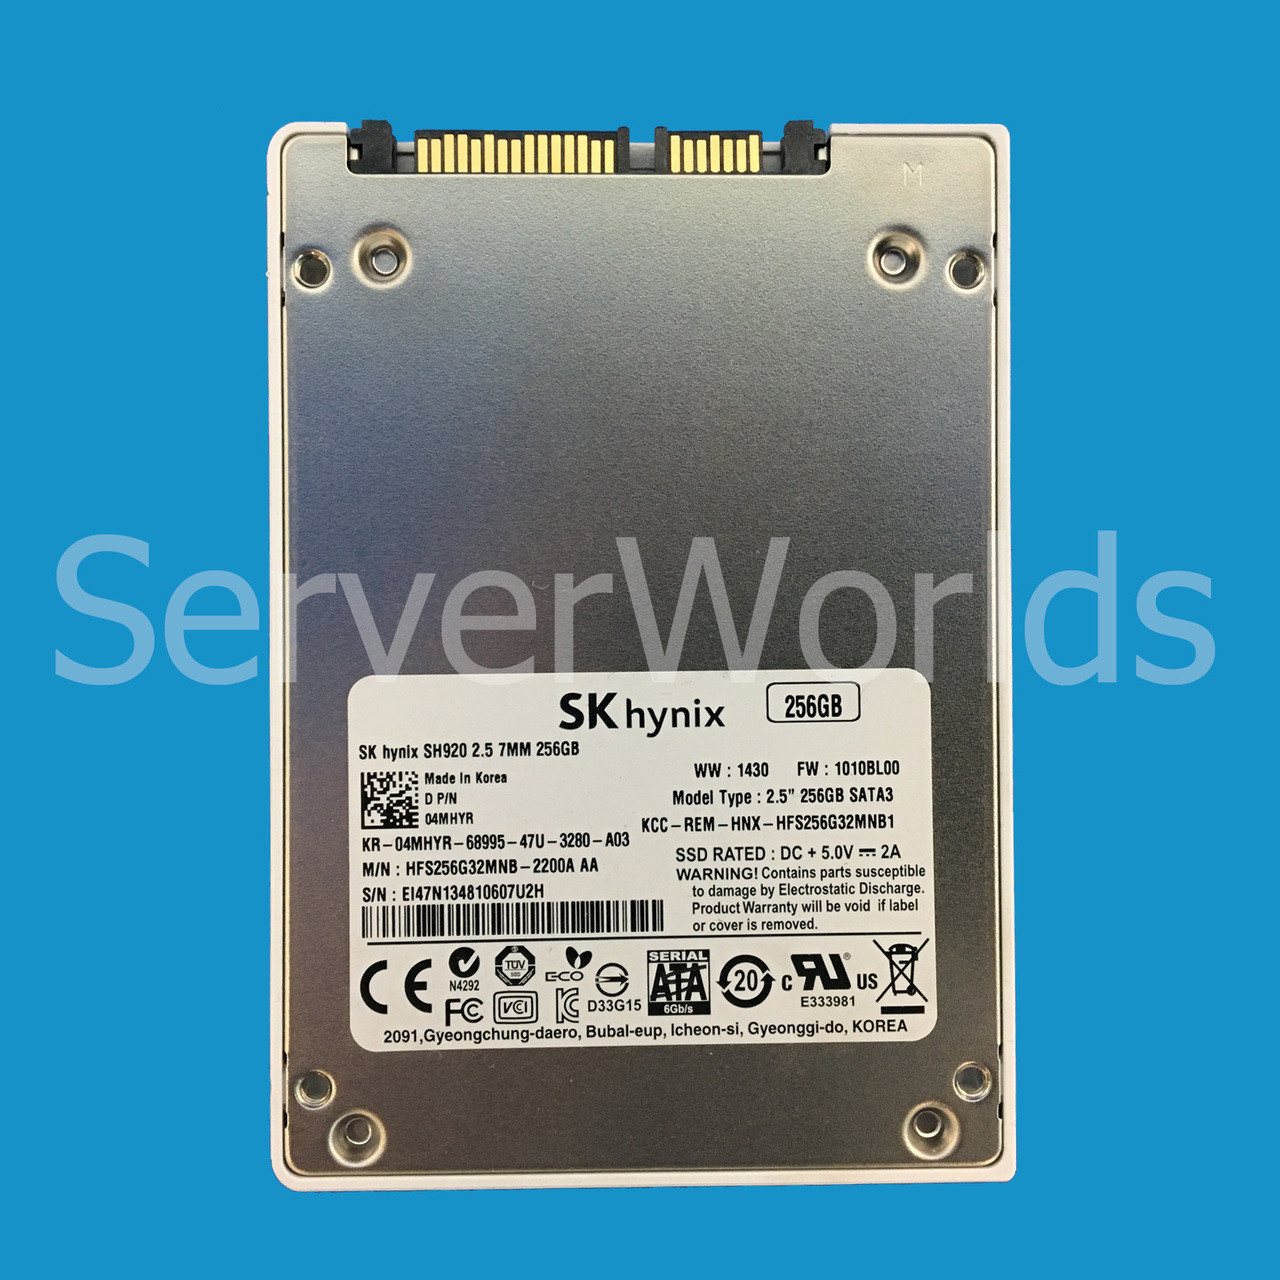 Dell 4MHYR 256GB 6GBPS 2.5" Solid State Drive HFS256G32MNB-2200A